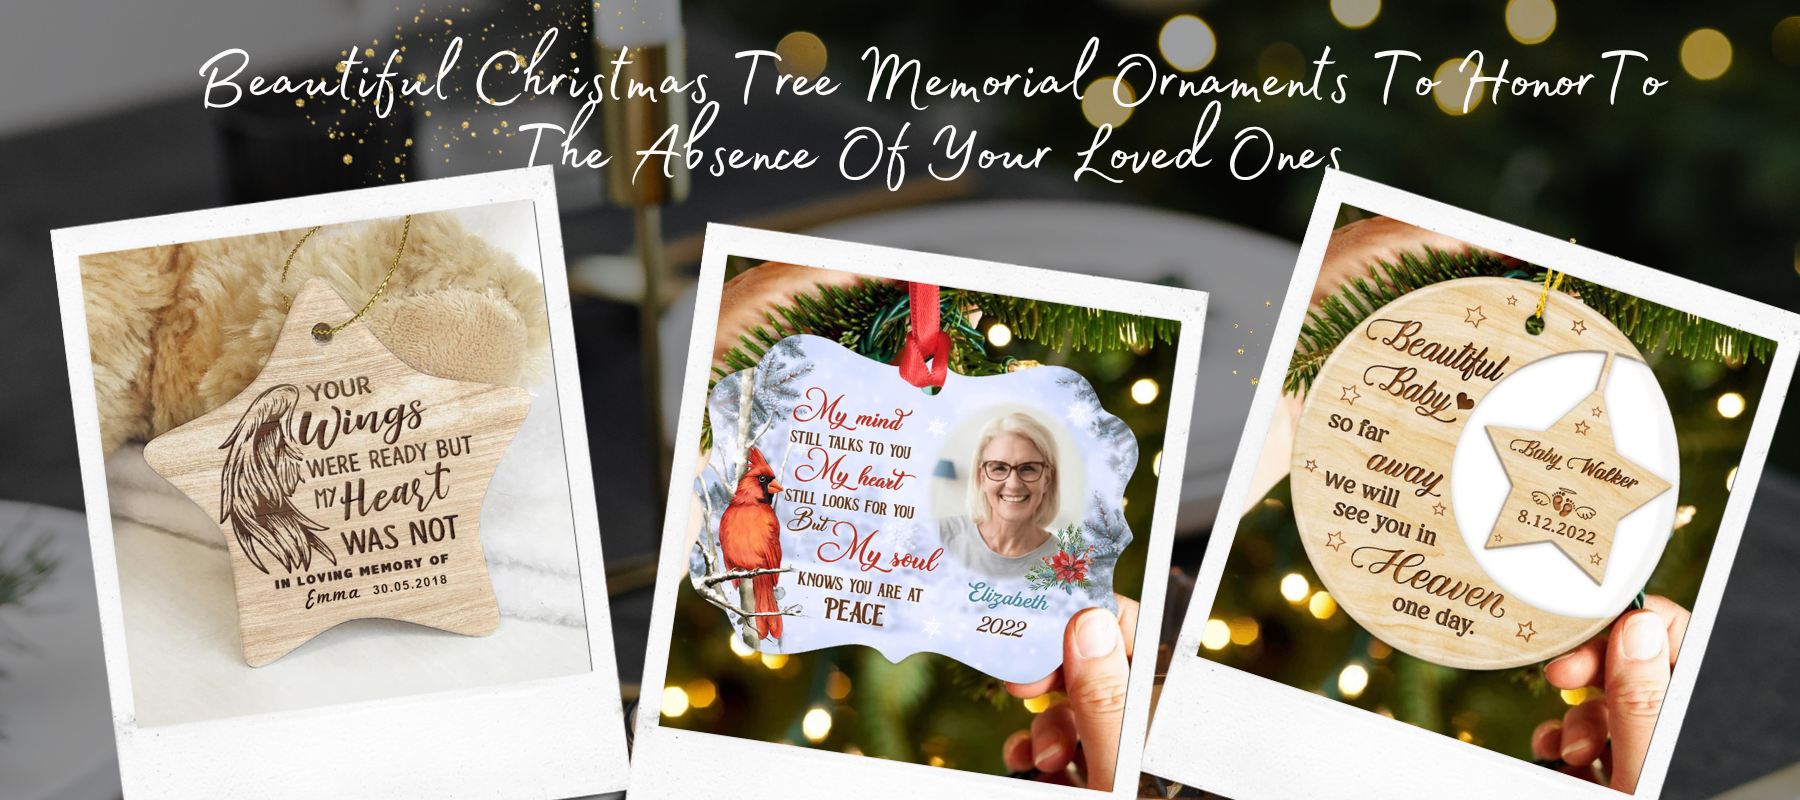 Beautiful Christmas Memorial Ornaments To Comfort You In The Absence Of Your Loved Ones